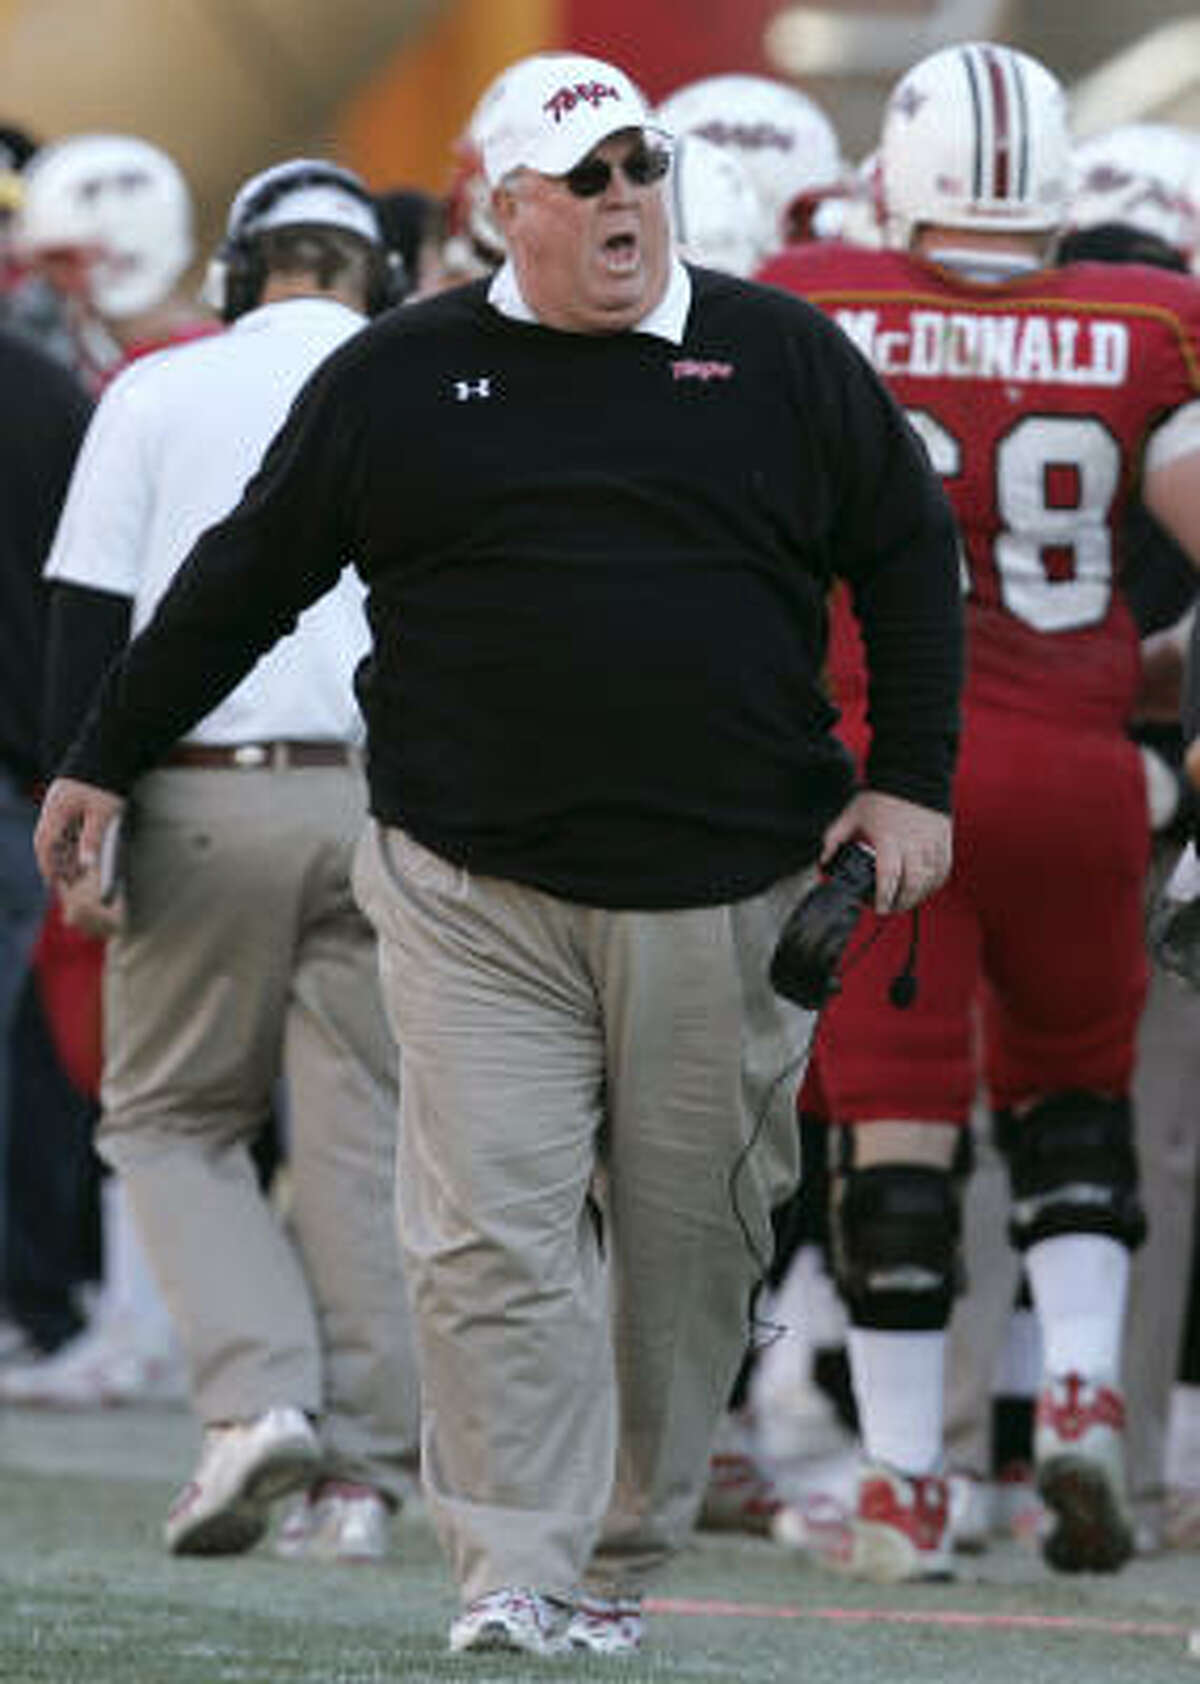 Maryland head coach Ralph Friedgen is 64-36 in eight seasons with the Terps. Friedgen has three years remaining on his contract and eventually will be replaced by assistant head coach/offensive coordinator James Franklin.